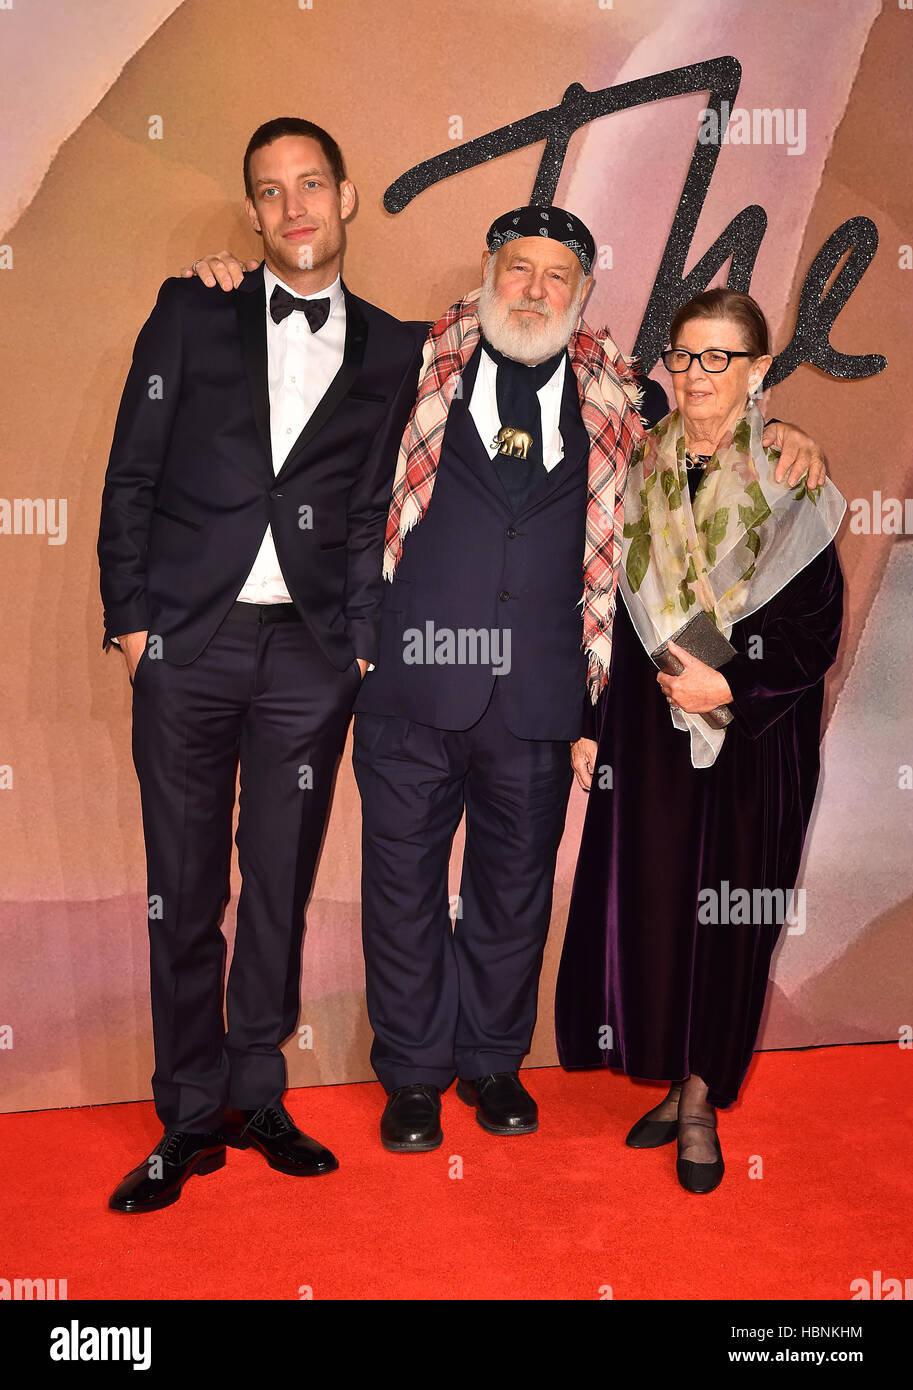 James Jagger, Bruce Weber and Nan Bush attending The Fashion Awards 2016 at the Royal Albert Hall, London. PRESS ASSOCIATION Photo. Picture date: Tuesday December 6th, 2016. Photo credit should read: Matt Crossick/PA Wire. Stock Photo